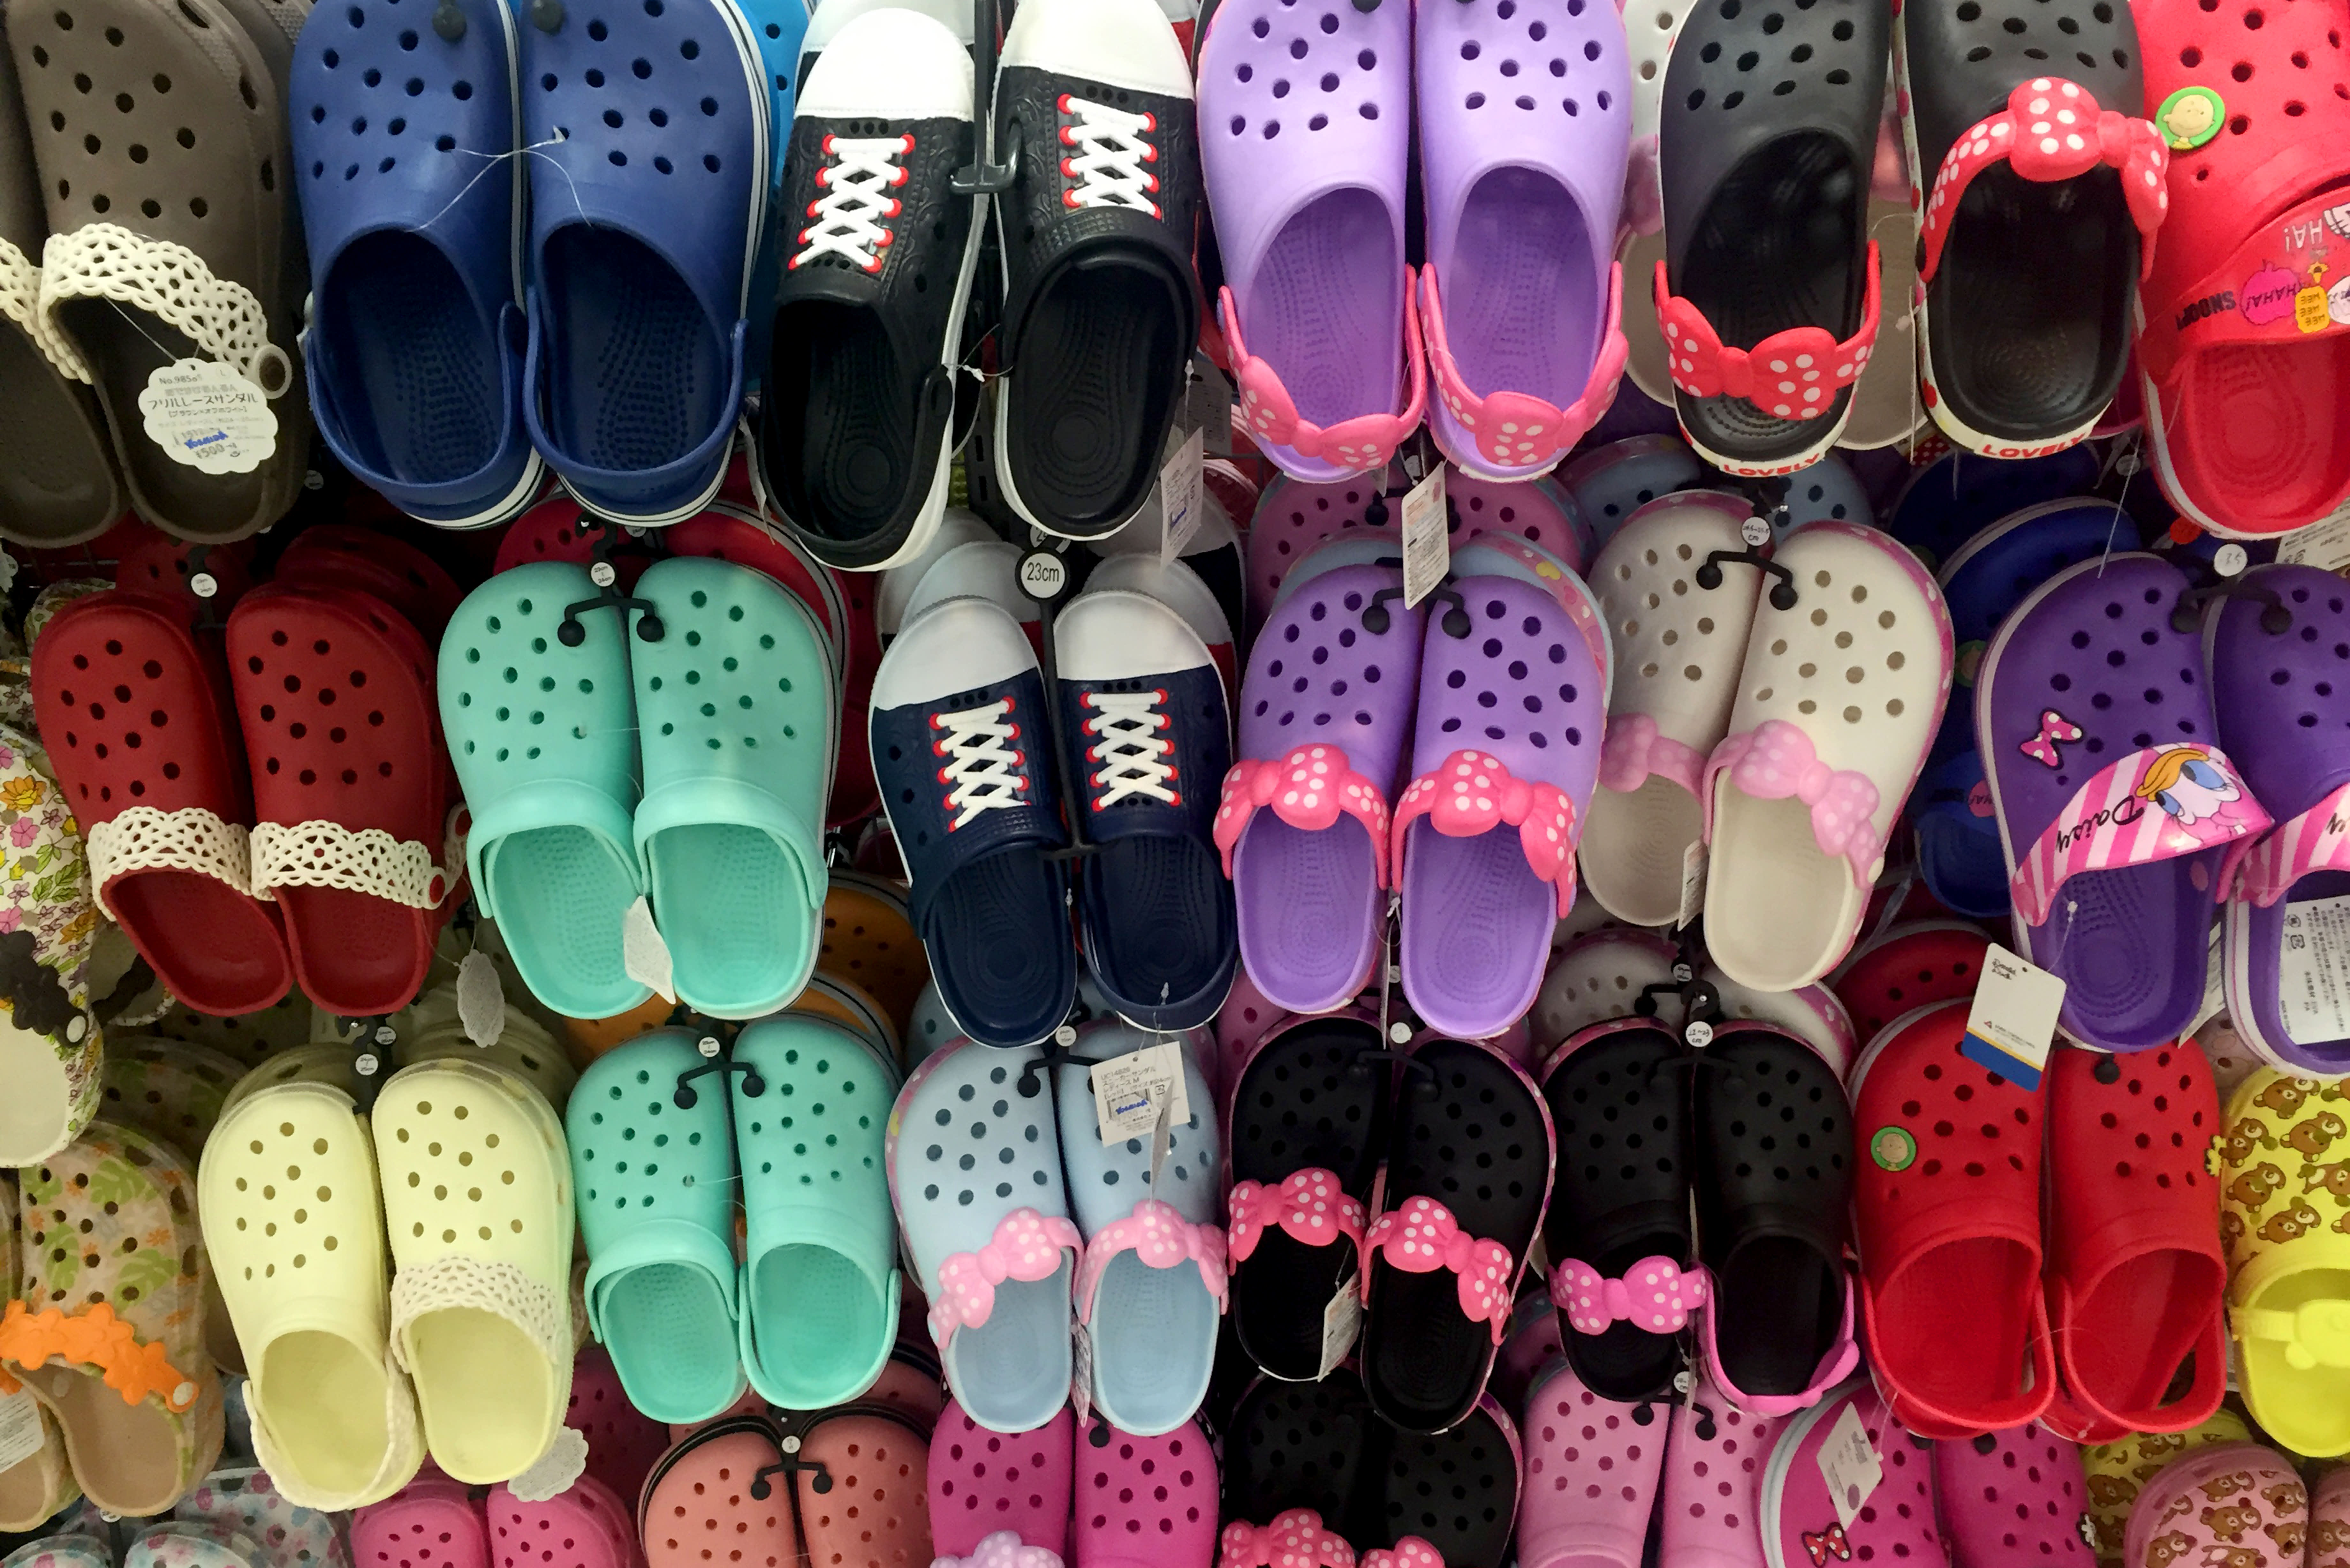 Andrew Rees, CEO of Crocs, is optimistic that the shoe brand could grow after the pandemic